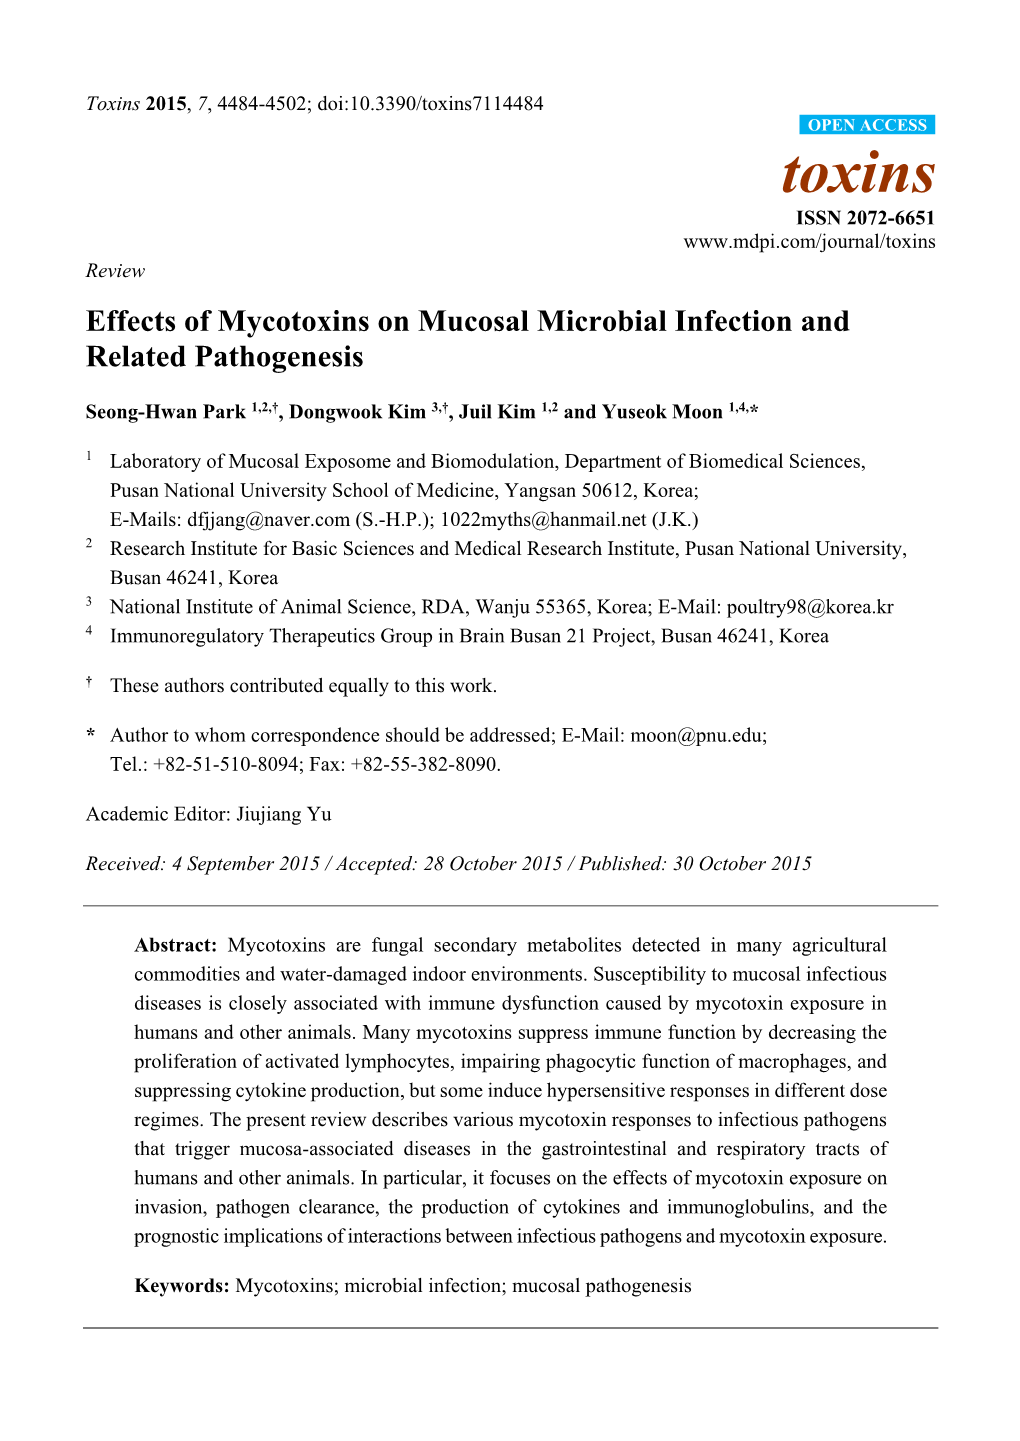 Effects of Mycotoxins on Mucosal Microbial Infection and Related Pathogenesis